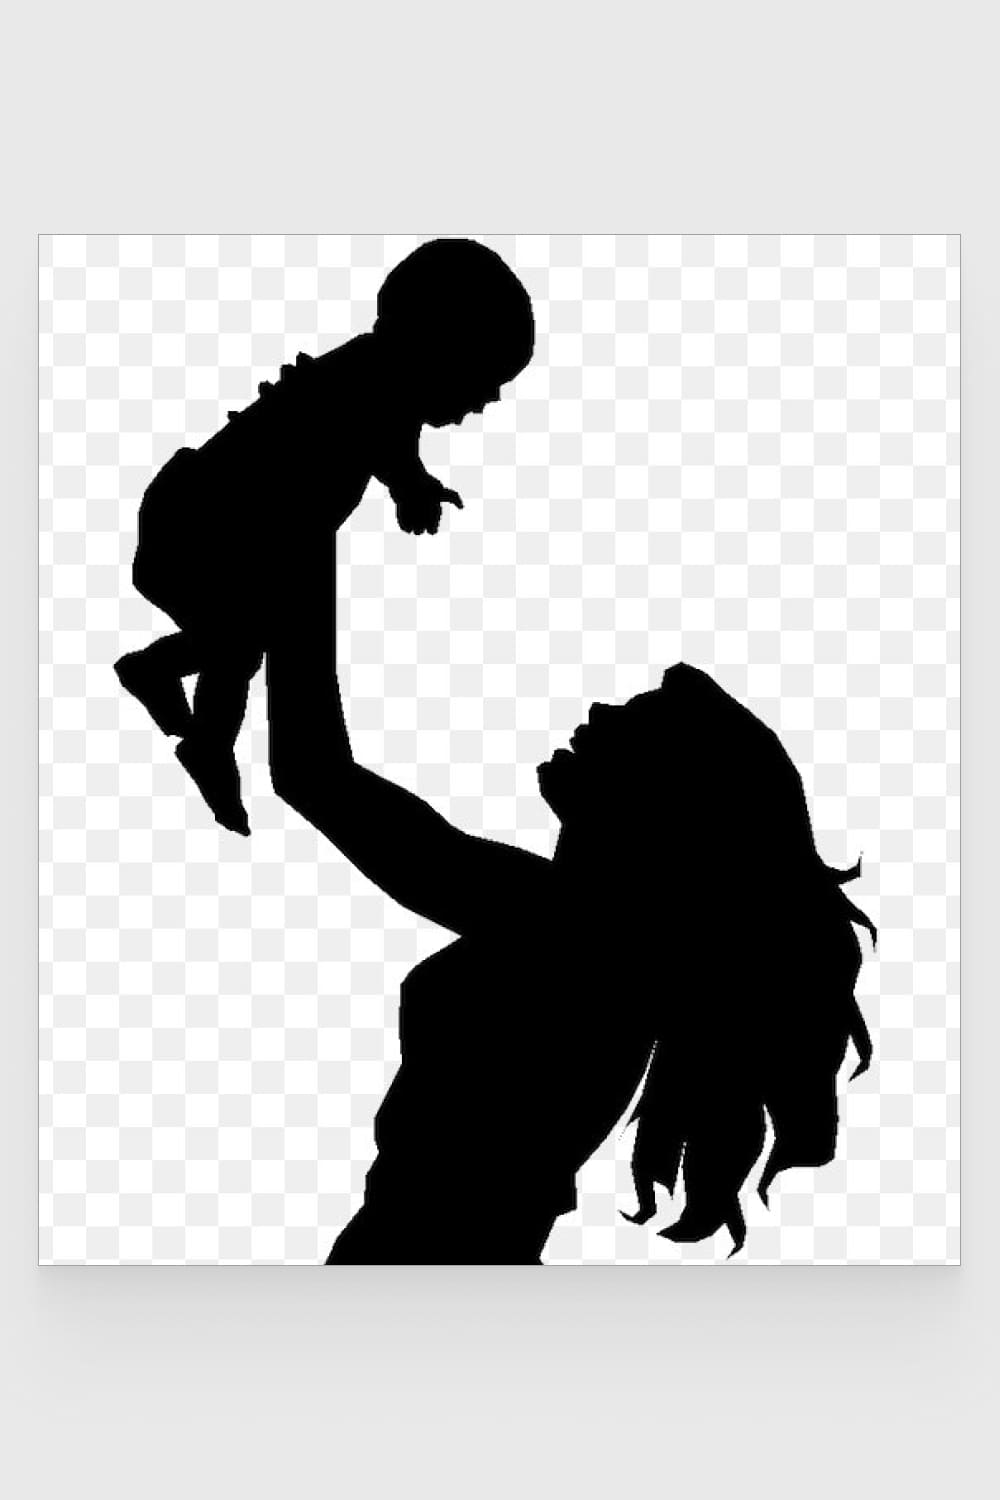 Black and white clipart in the form of a mother holding a child in outstretched arms.